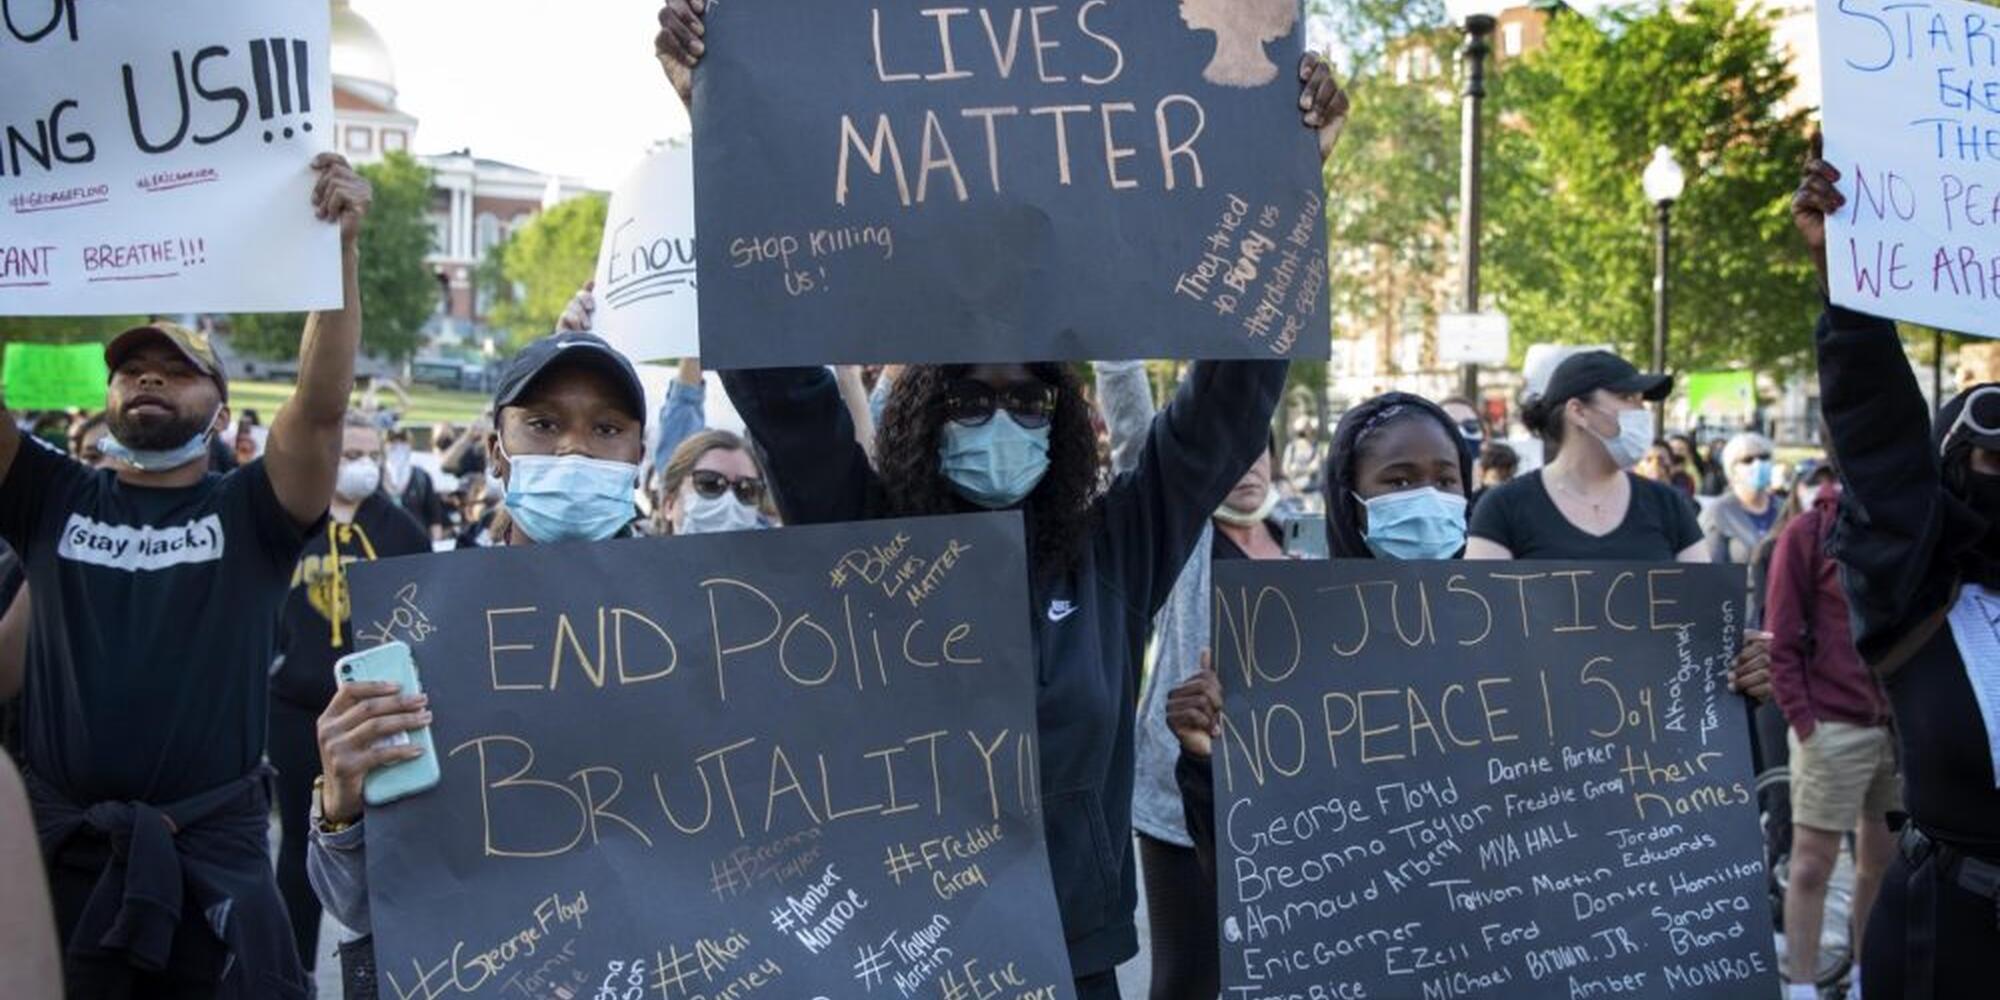 Image of BLM protesters with BLM signs held up